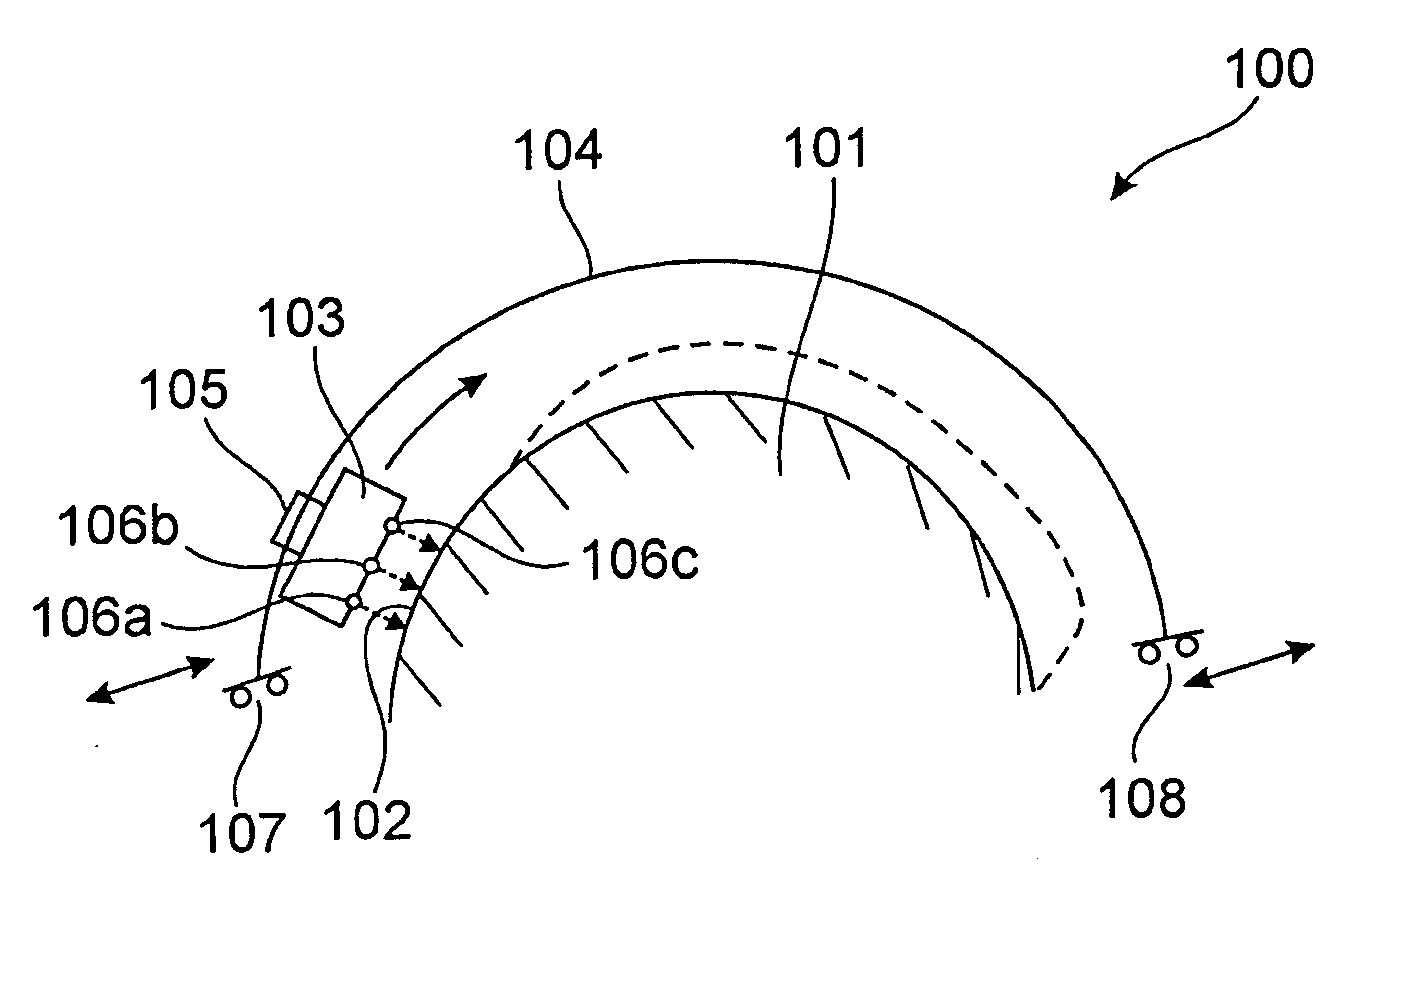 Painting device, painting arrangement, method for painting a curved surface of an object, and use of an inkjet device for painting an aircraft